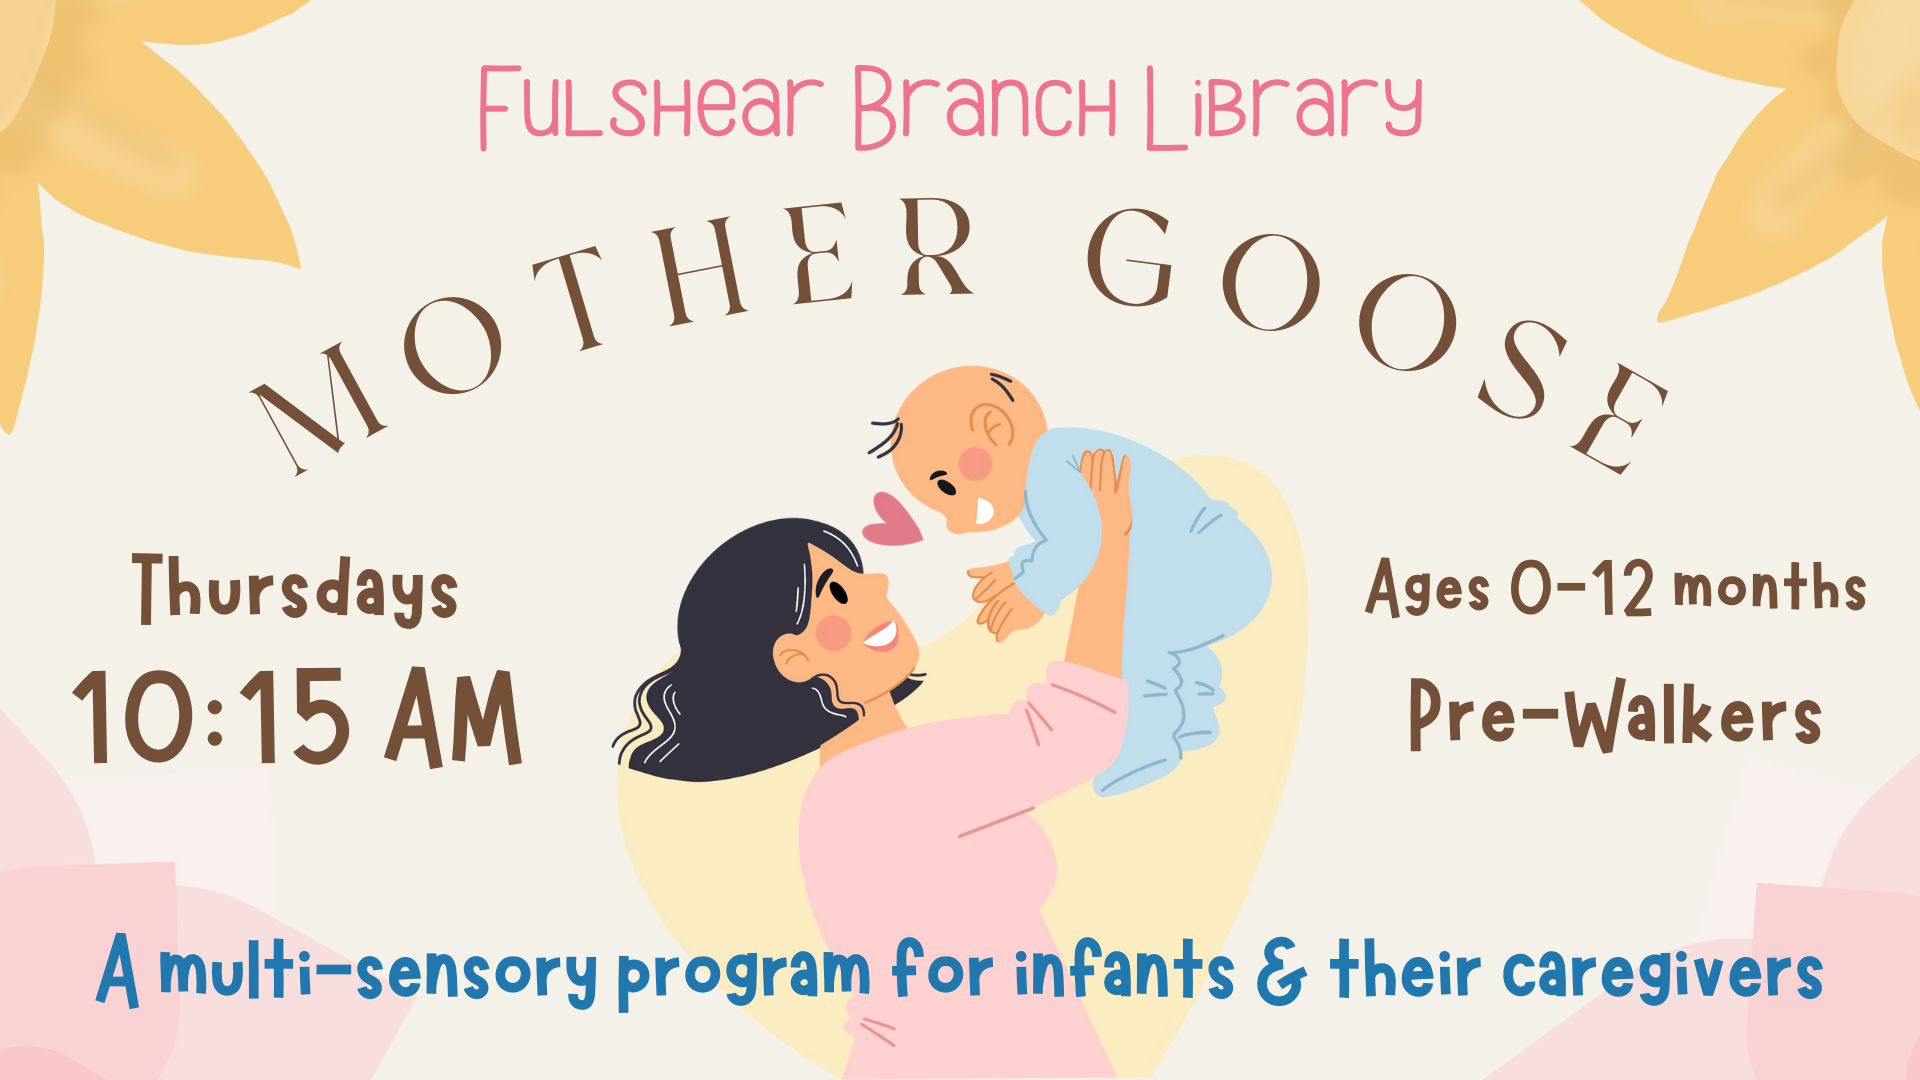 Fulshear Branch Library Mother Goose Thursdays 10:15 AM Ages 0-12 months Pre-Walkers A multi-sensory program for infants & their caregivers